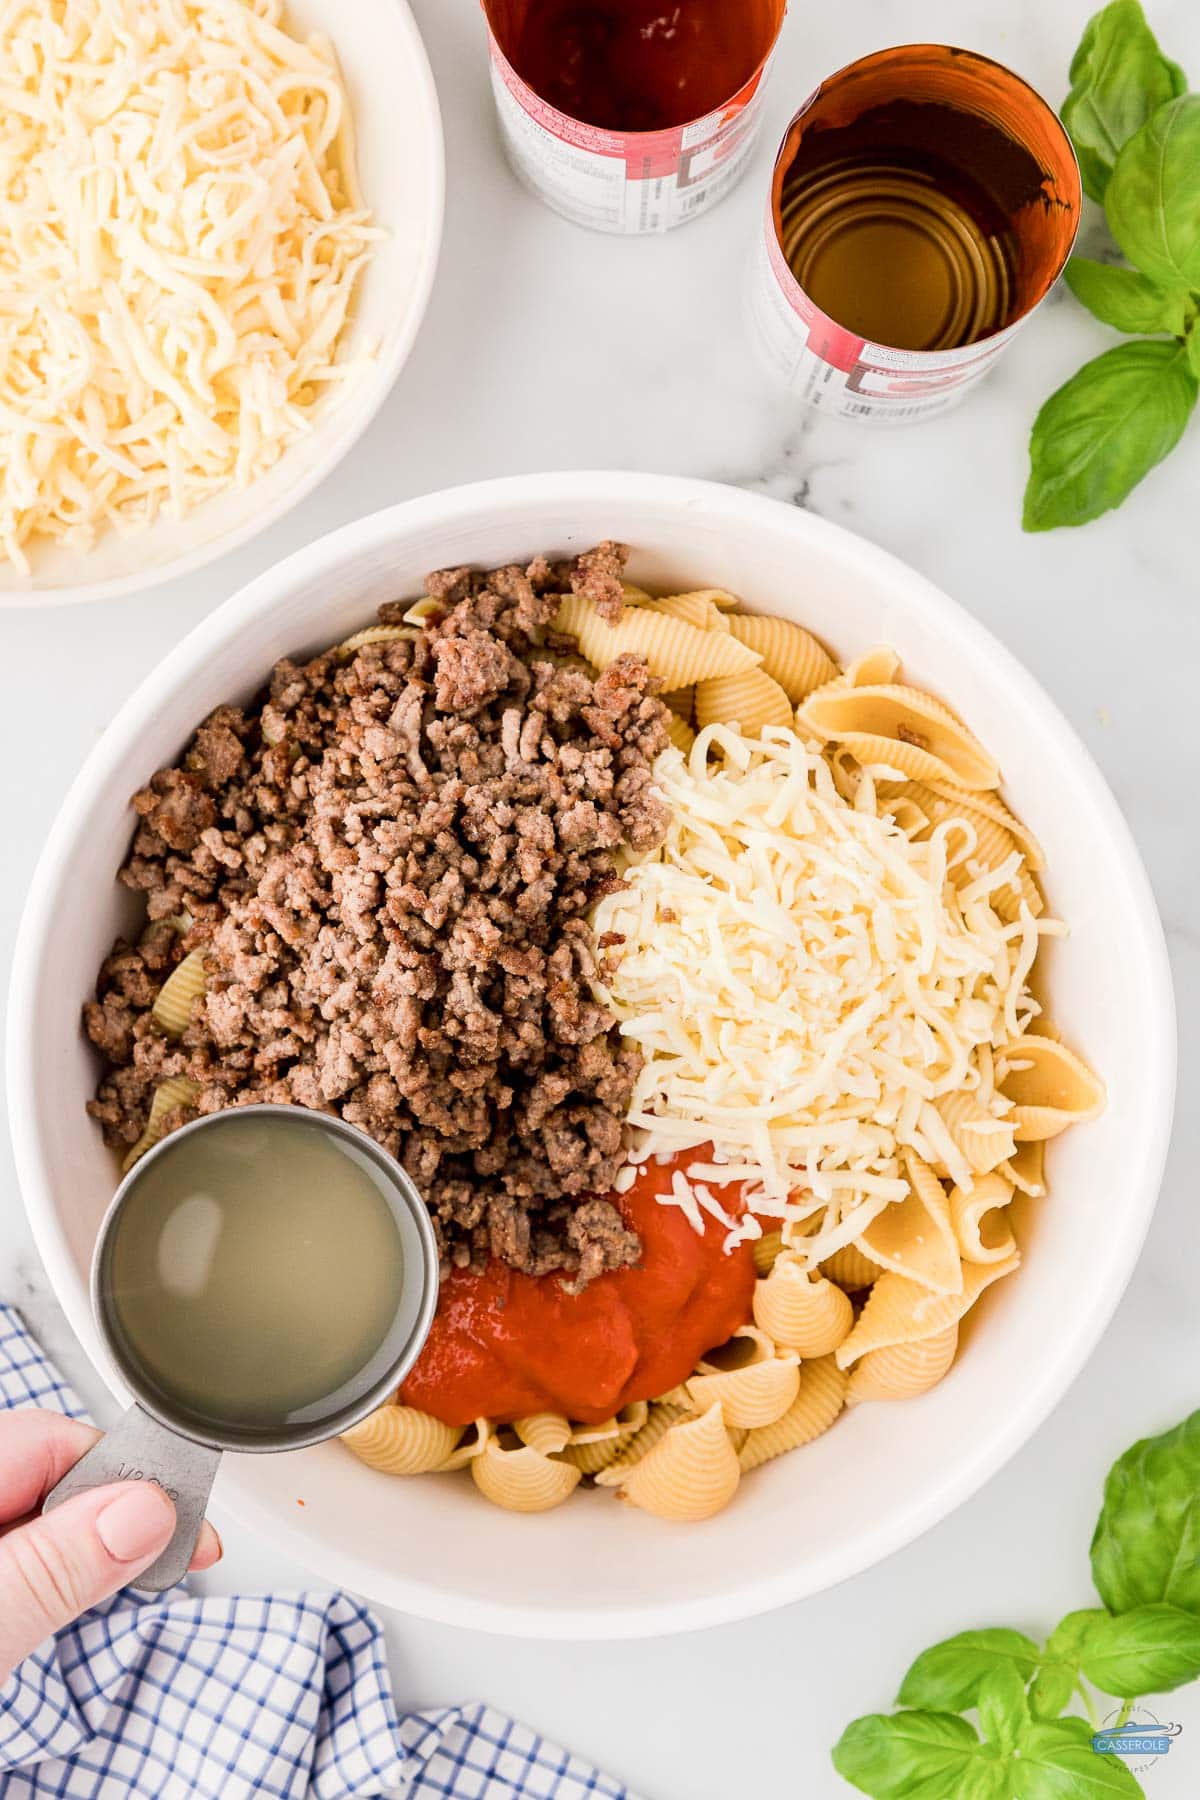 beef, cheese, tomato soup, and pasta shells in a white bowl